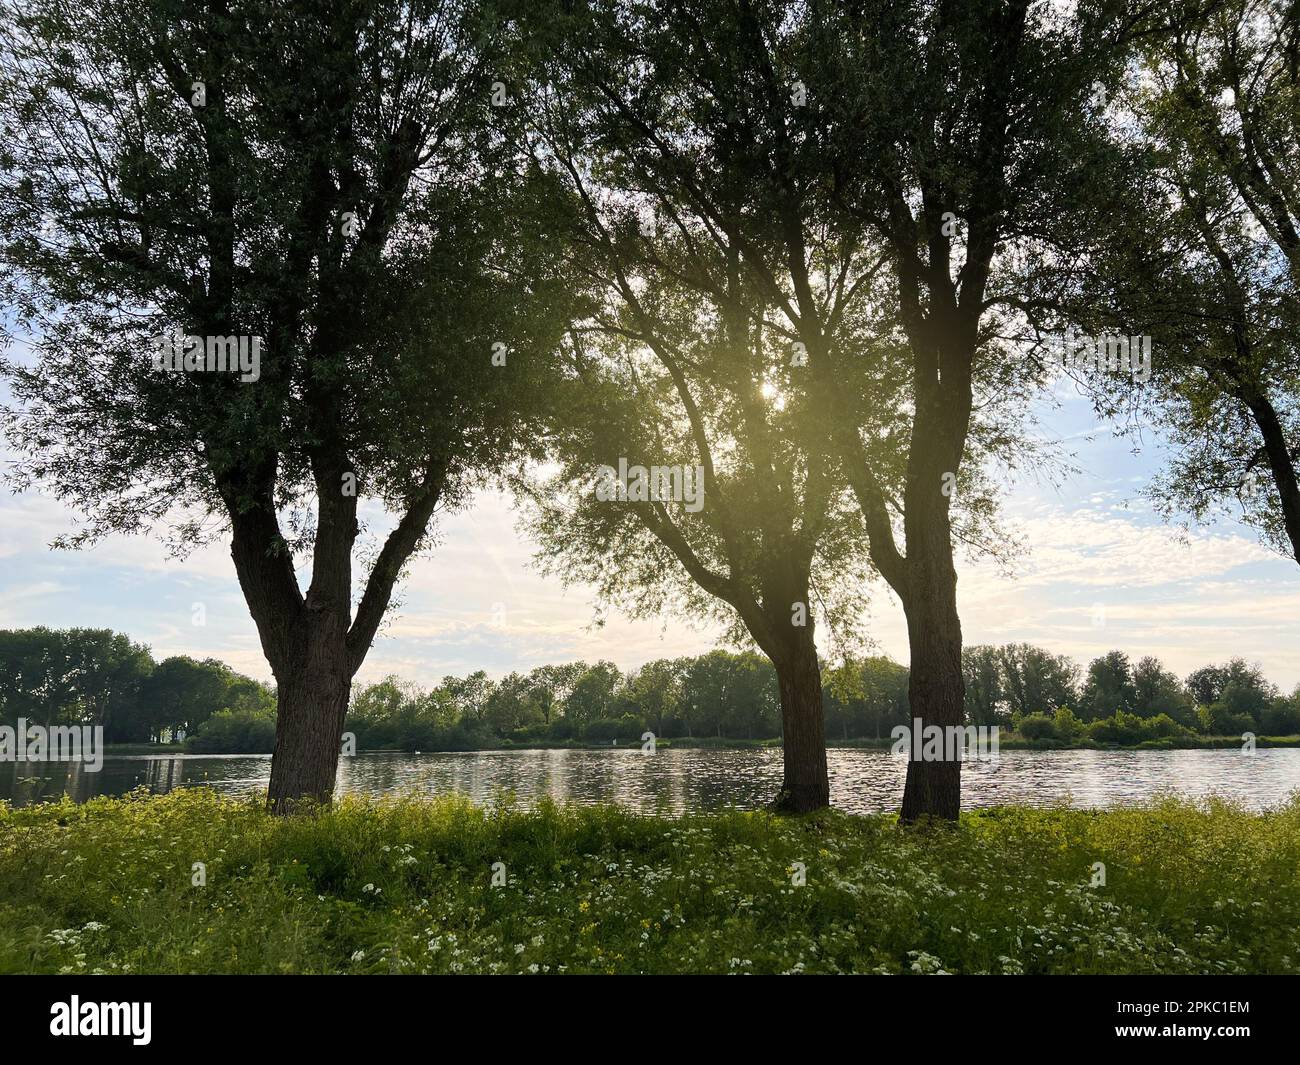 Beautiful view on green bank with trees near lake. Picturesque landscape Stock Photo